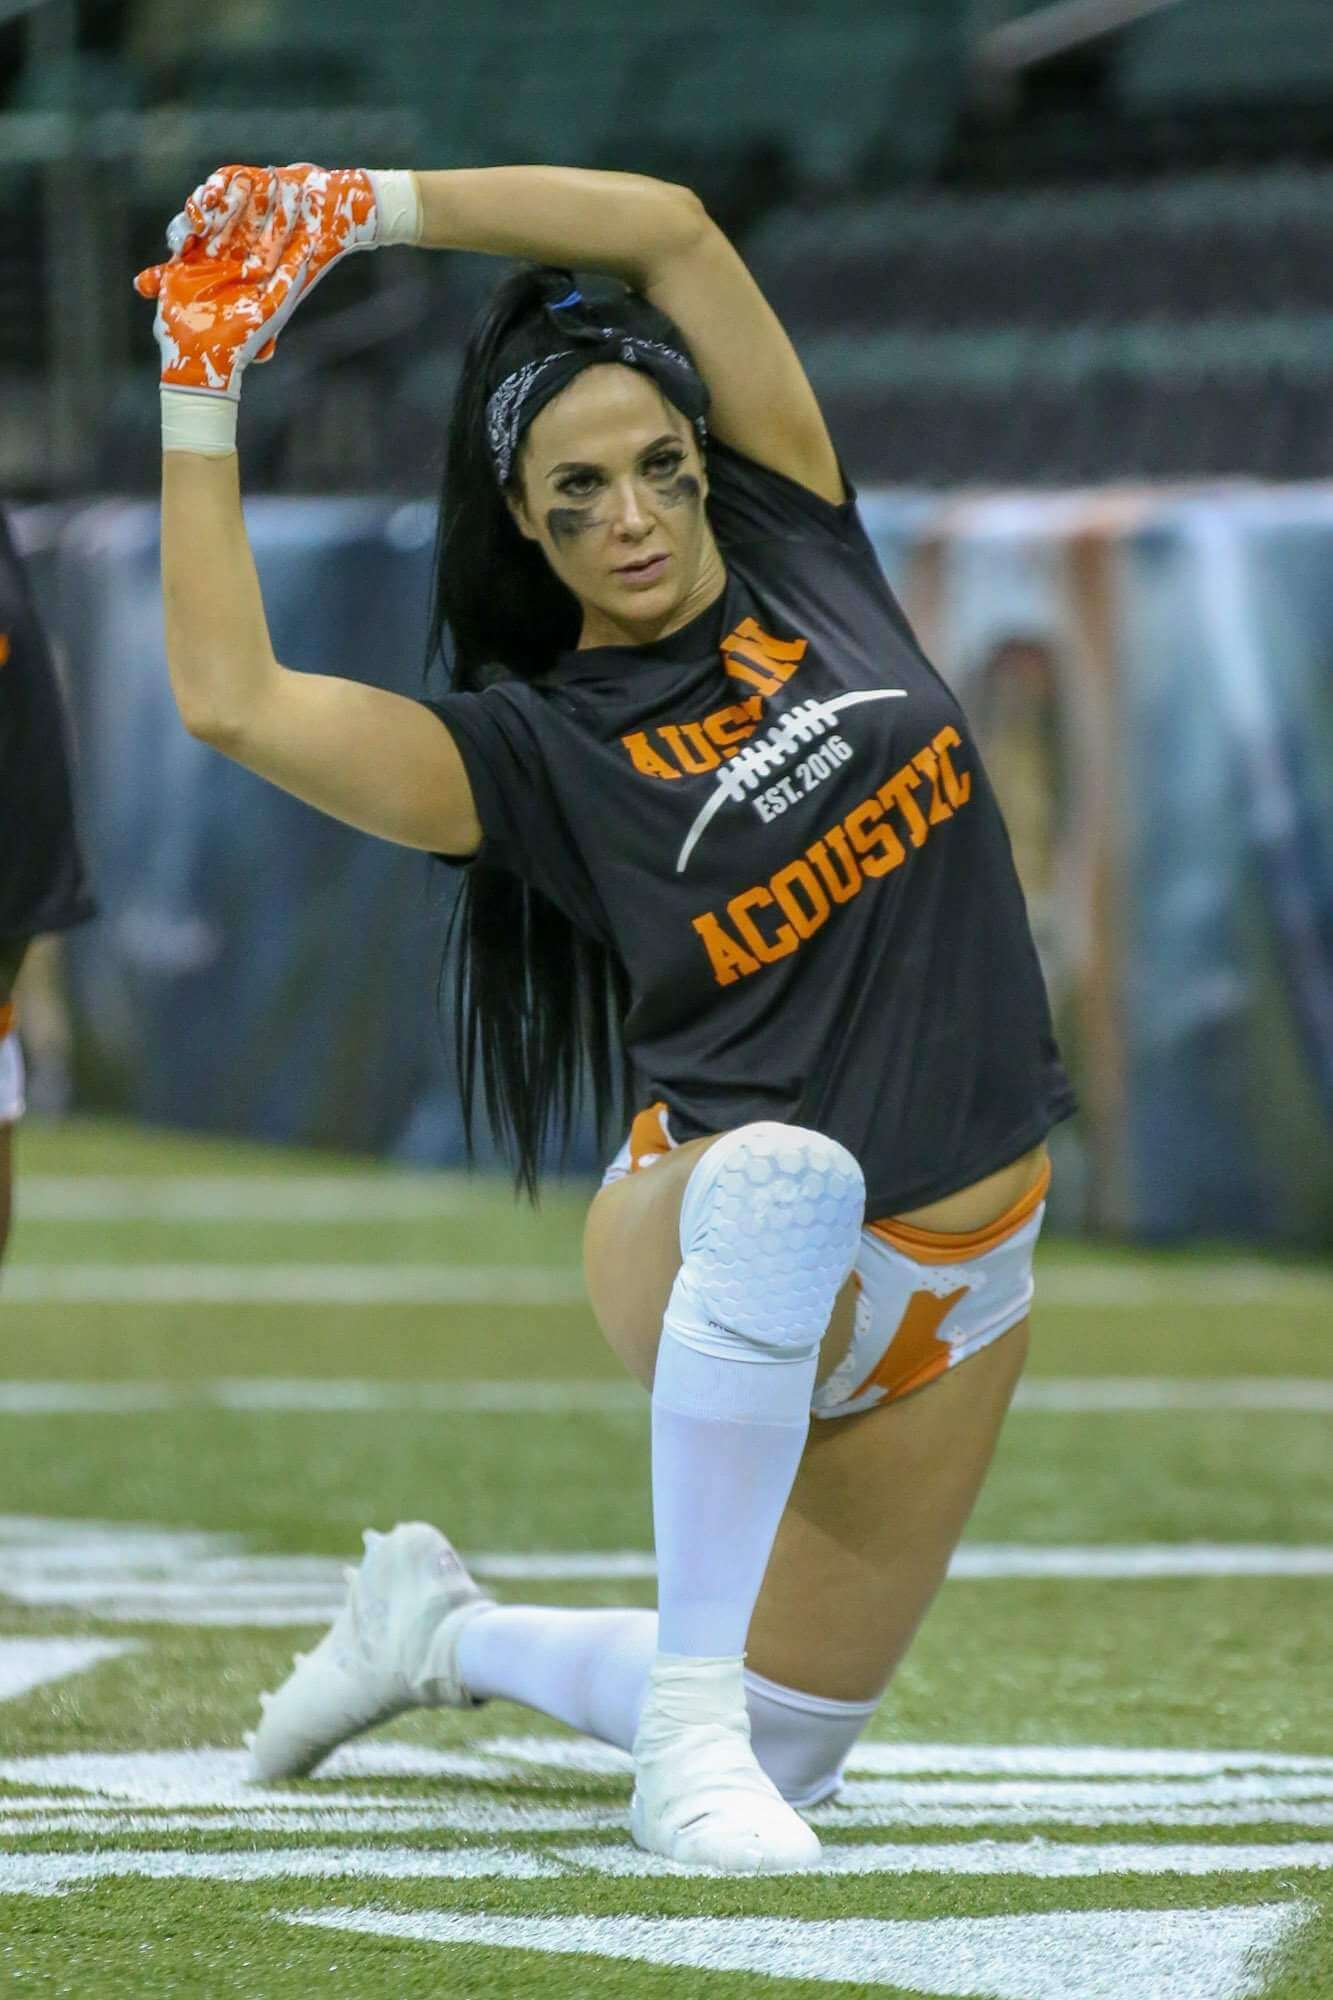 The Legends Football League Beautiful Women And Football, Need We Say Anymore! 77